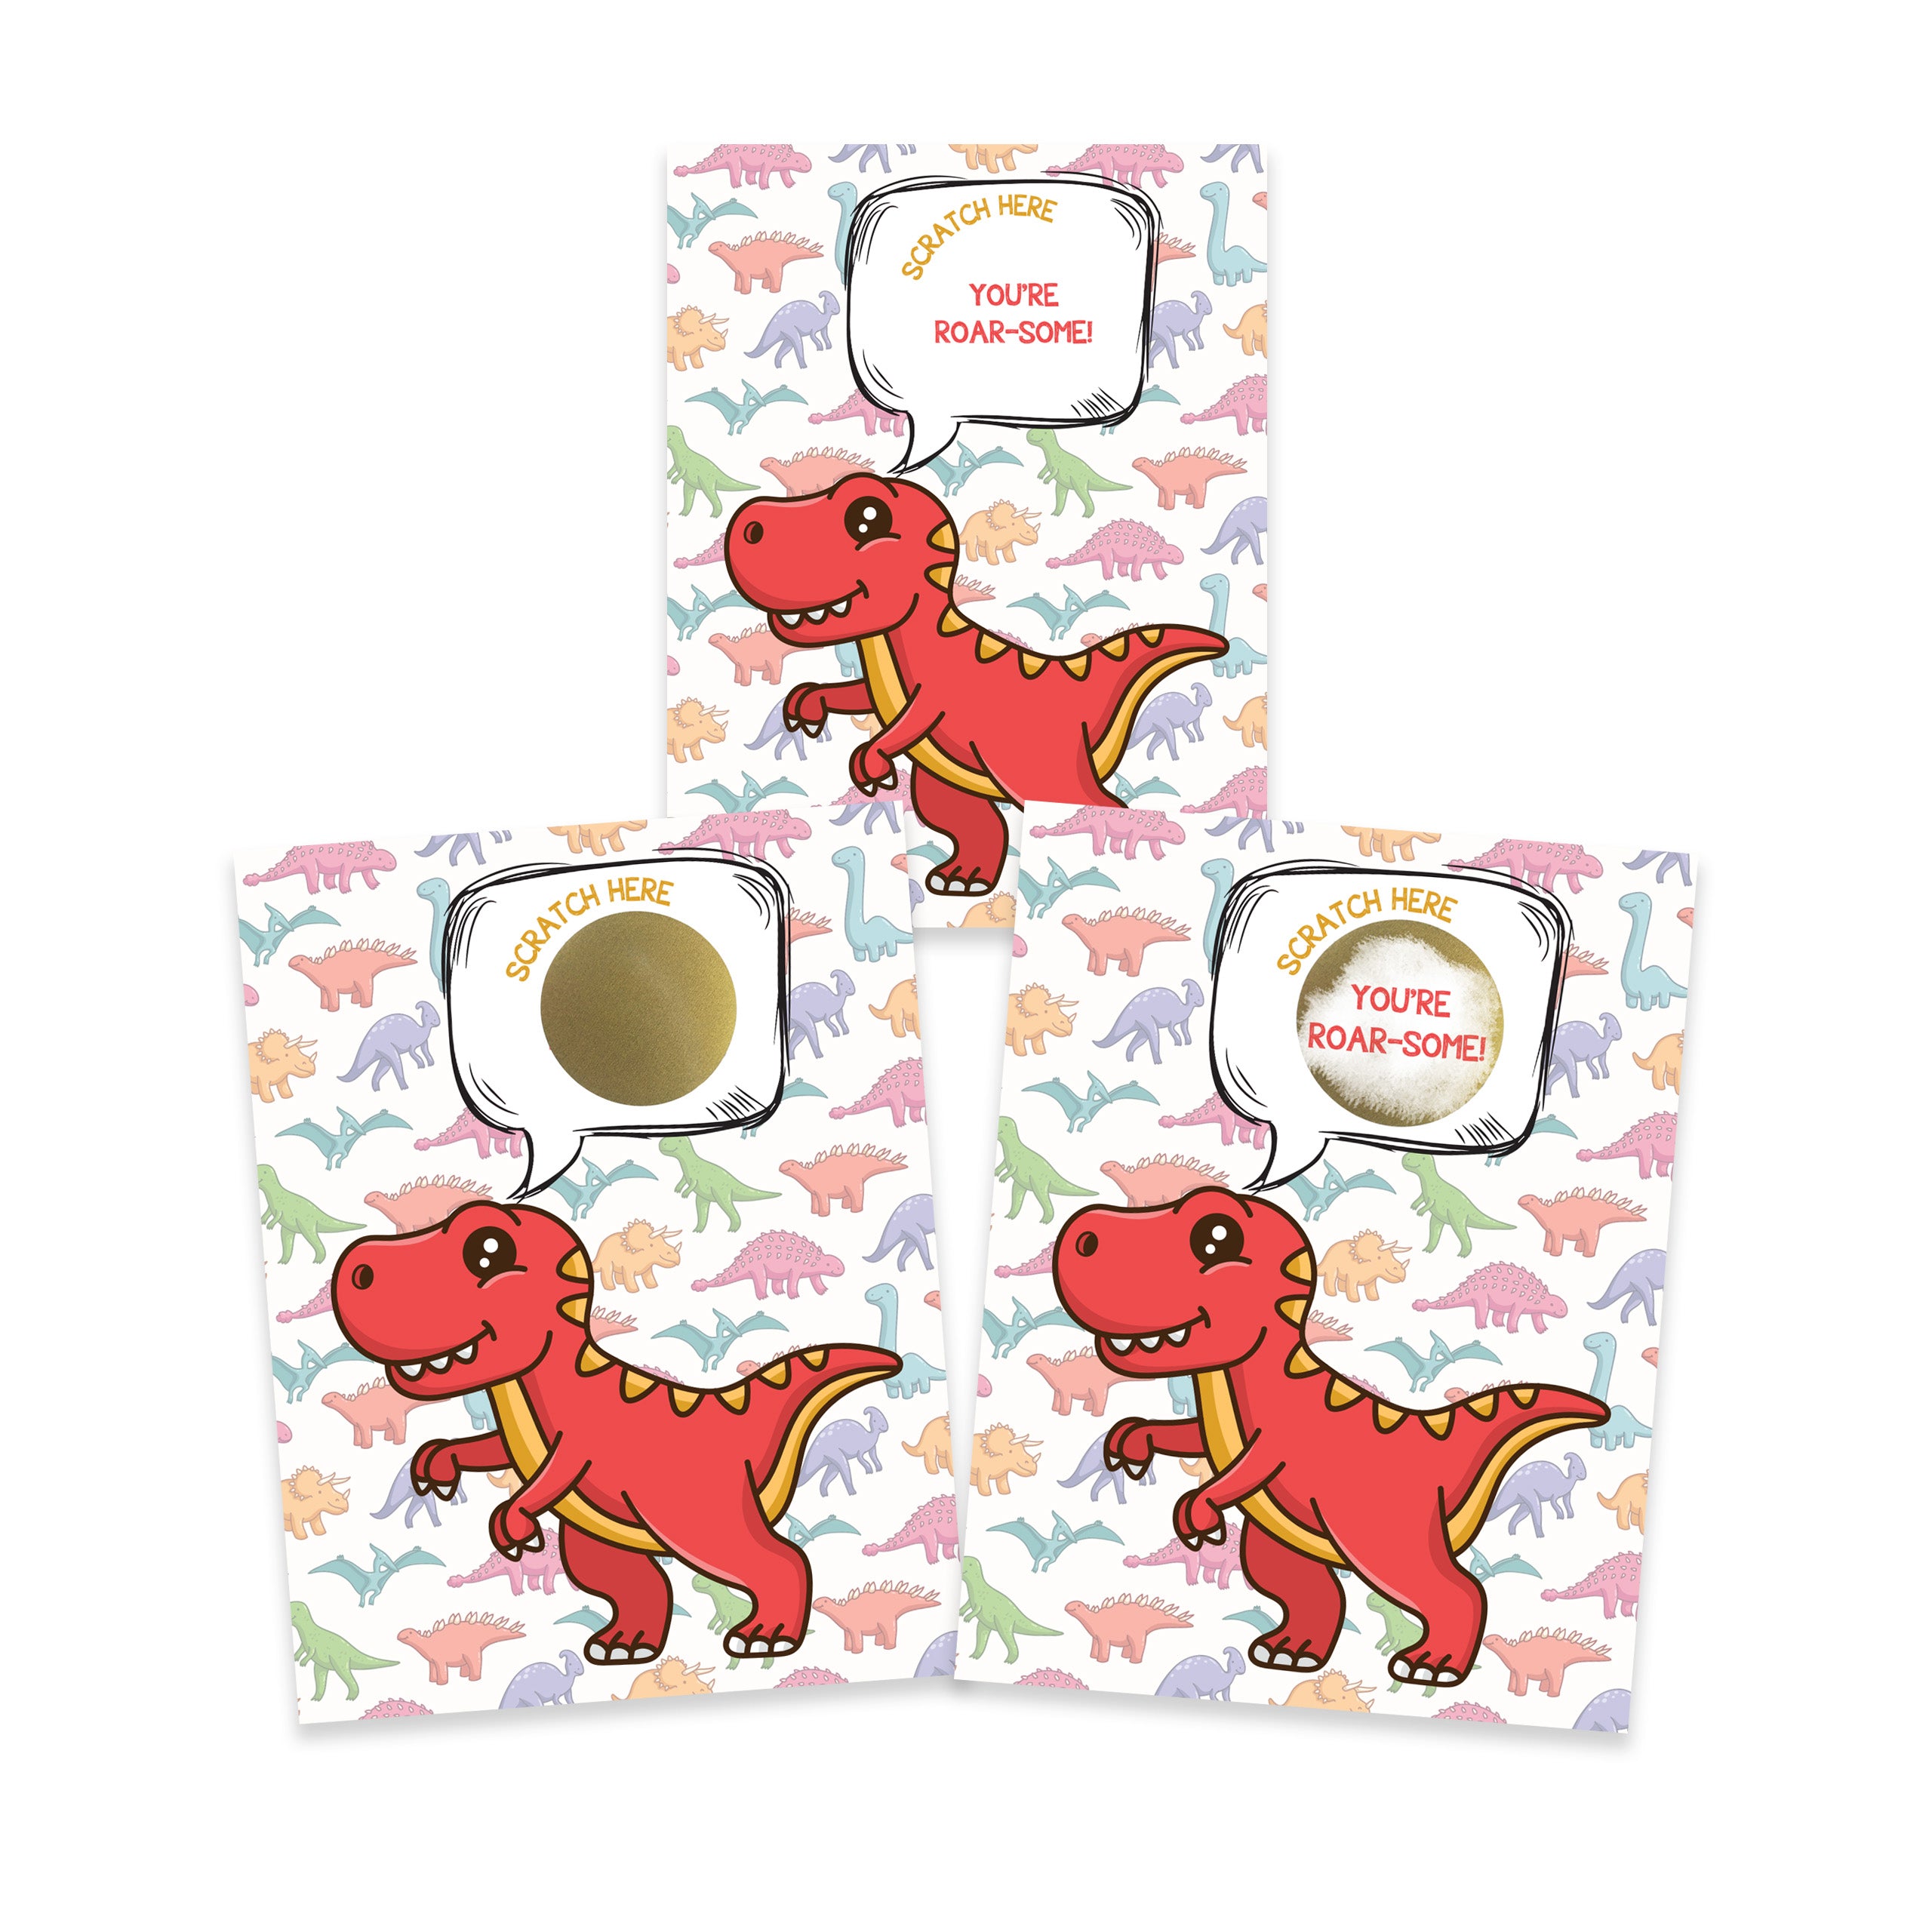 Dino Dinosaur Scratch Off Valentine's Day Classroom Party Favor Kit of 25 Cards 3x4 - My Scratch Offs